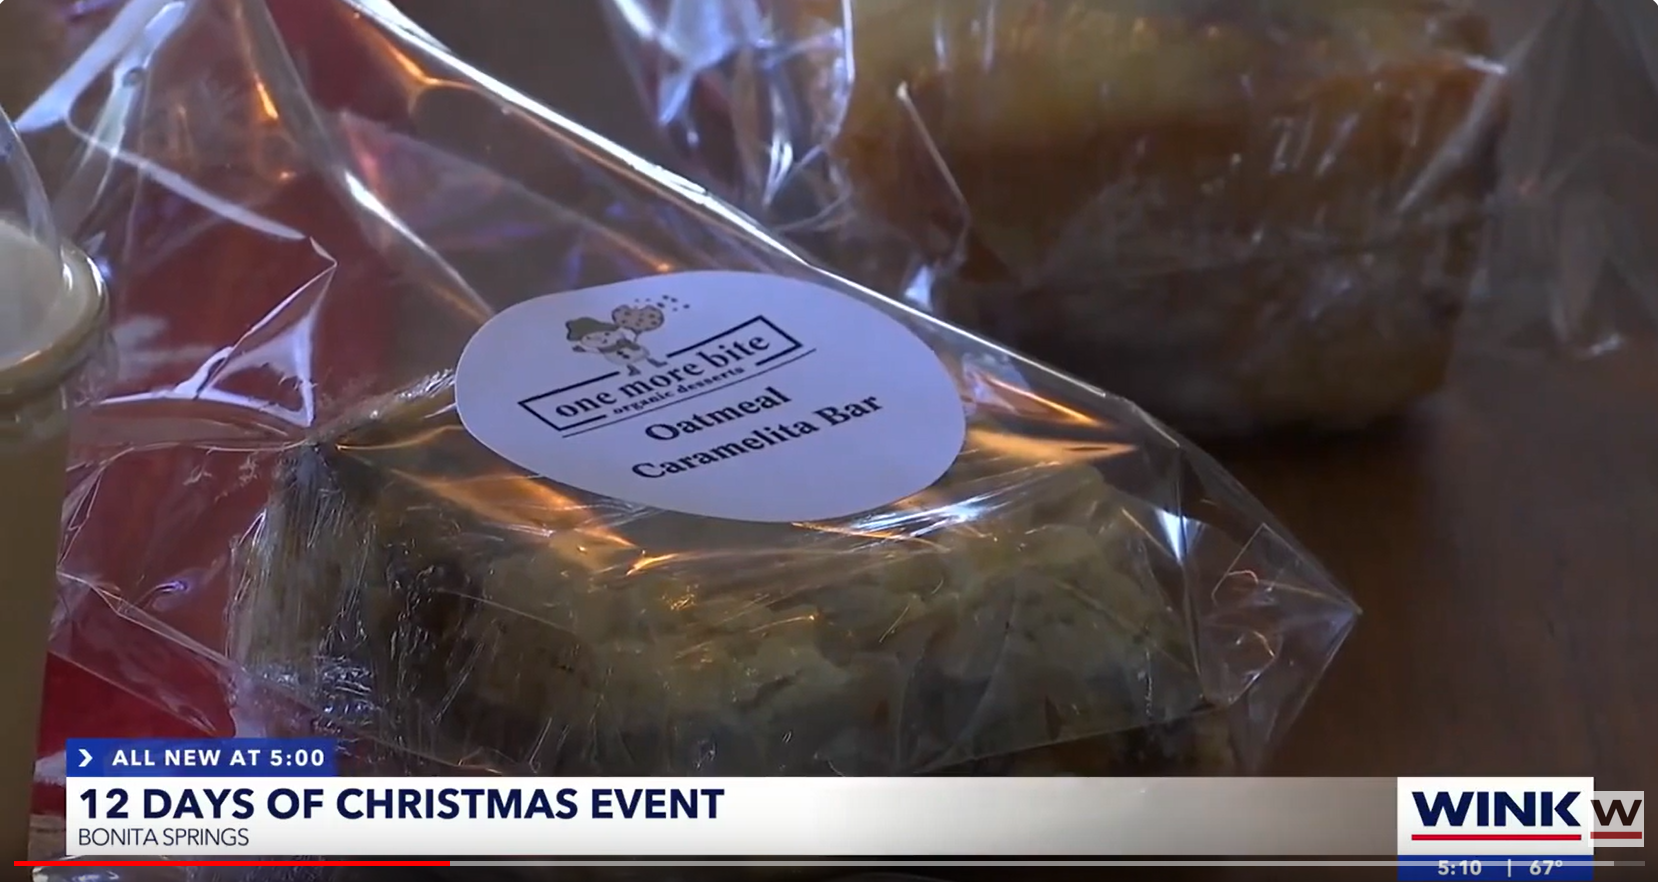 Load video: WINK News 12 Days of Christmas Video including One More Bite Organic Desserts